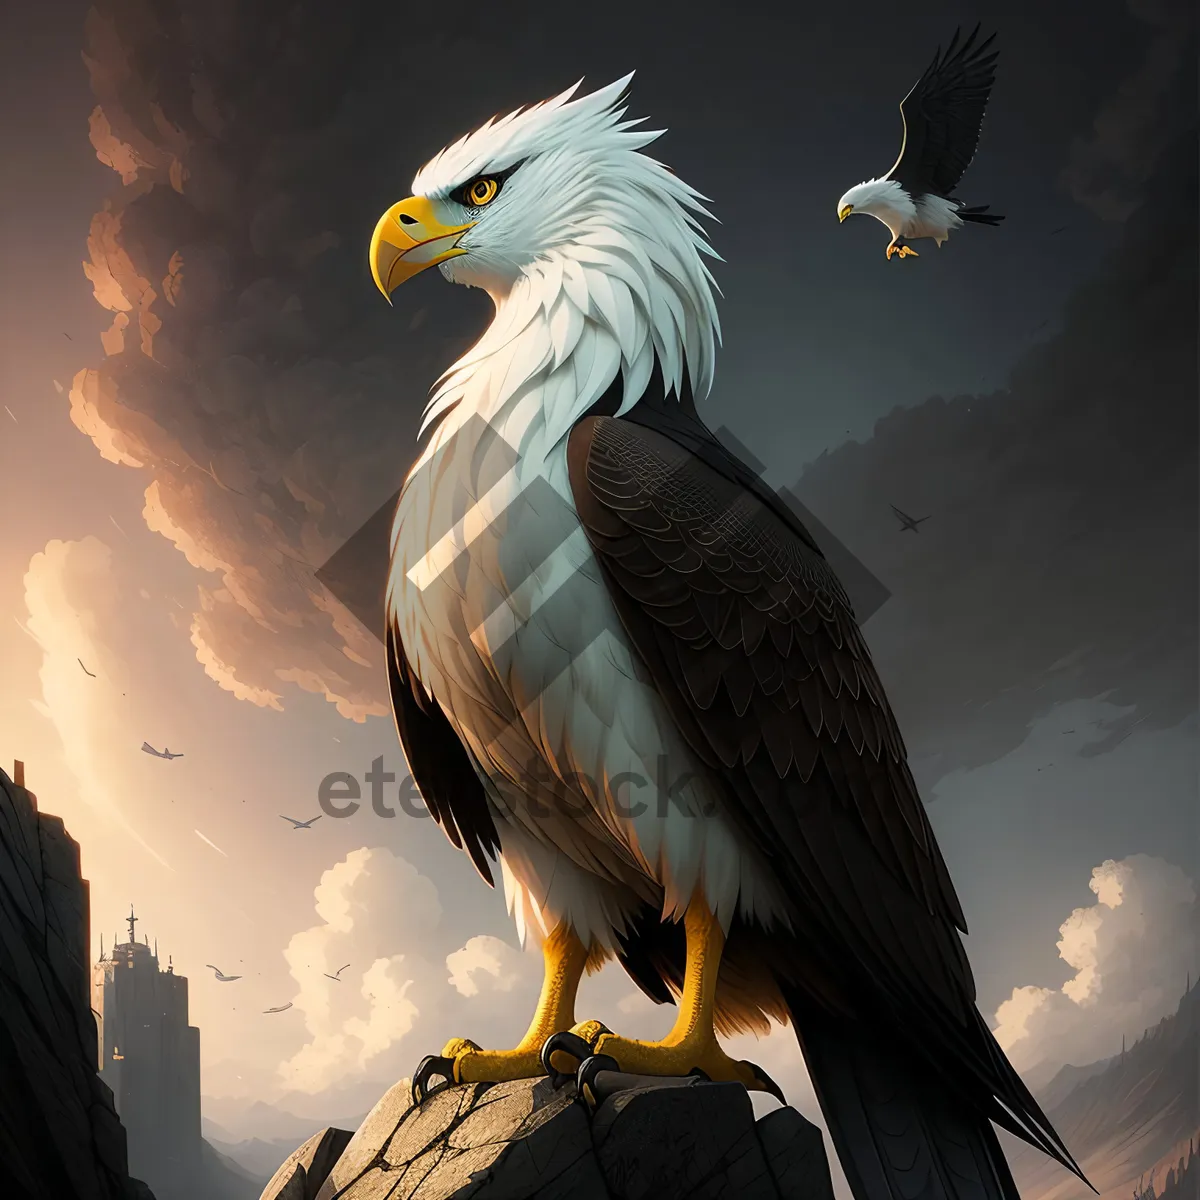 Picture of Graceful Hunter: Majestic Bald Eagle Soaring by the Water